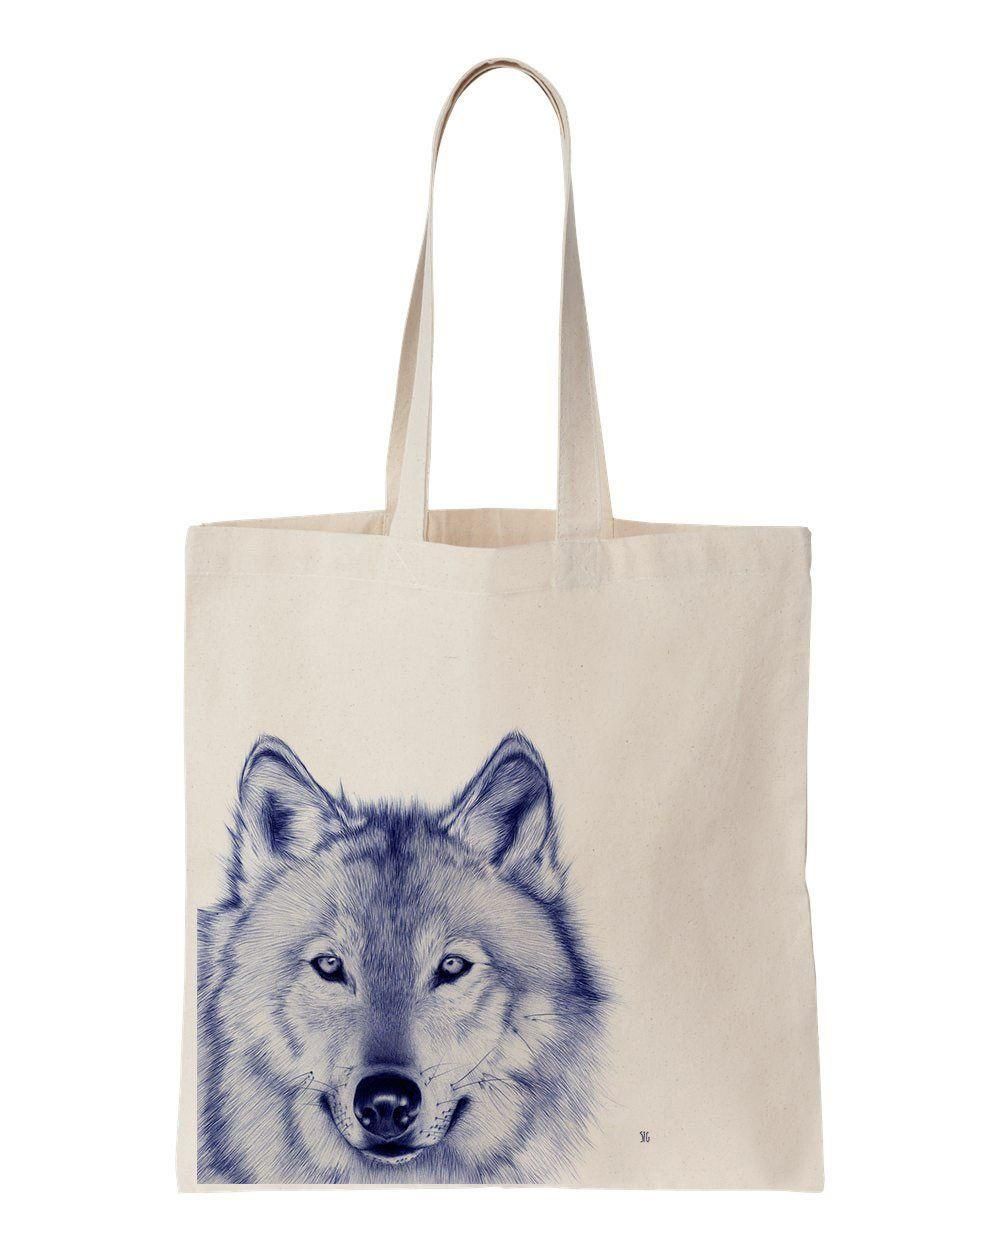 Blue Wolf Face Printed Tote Bag Birthday Gift For Girls